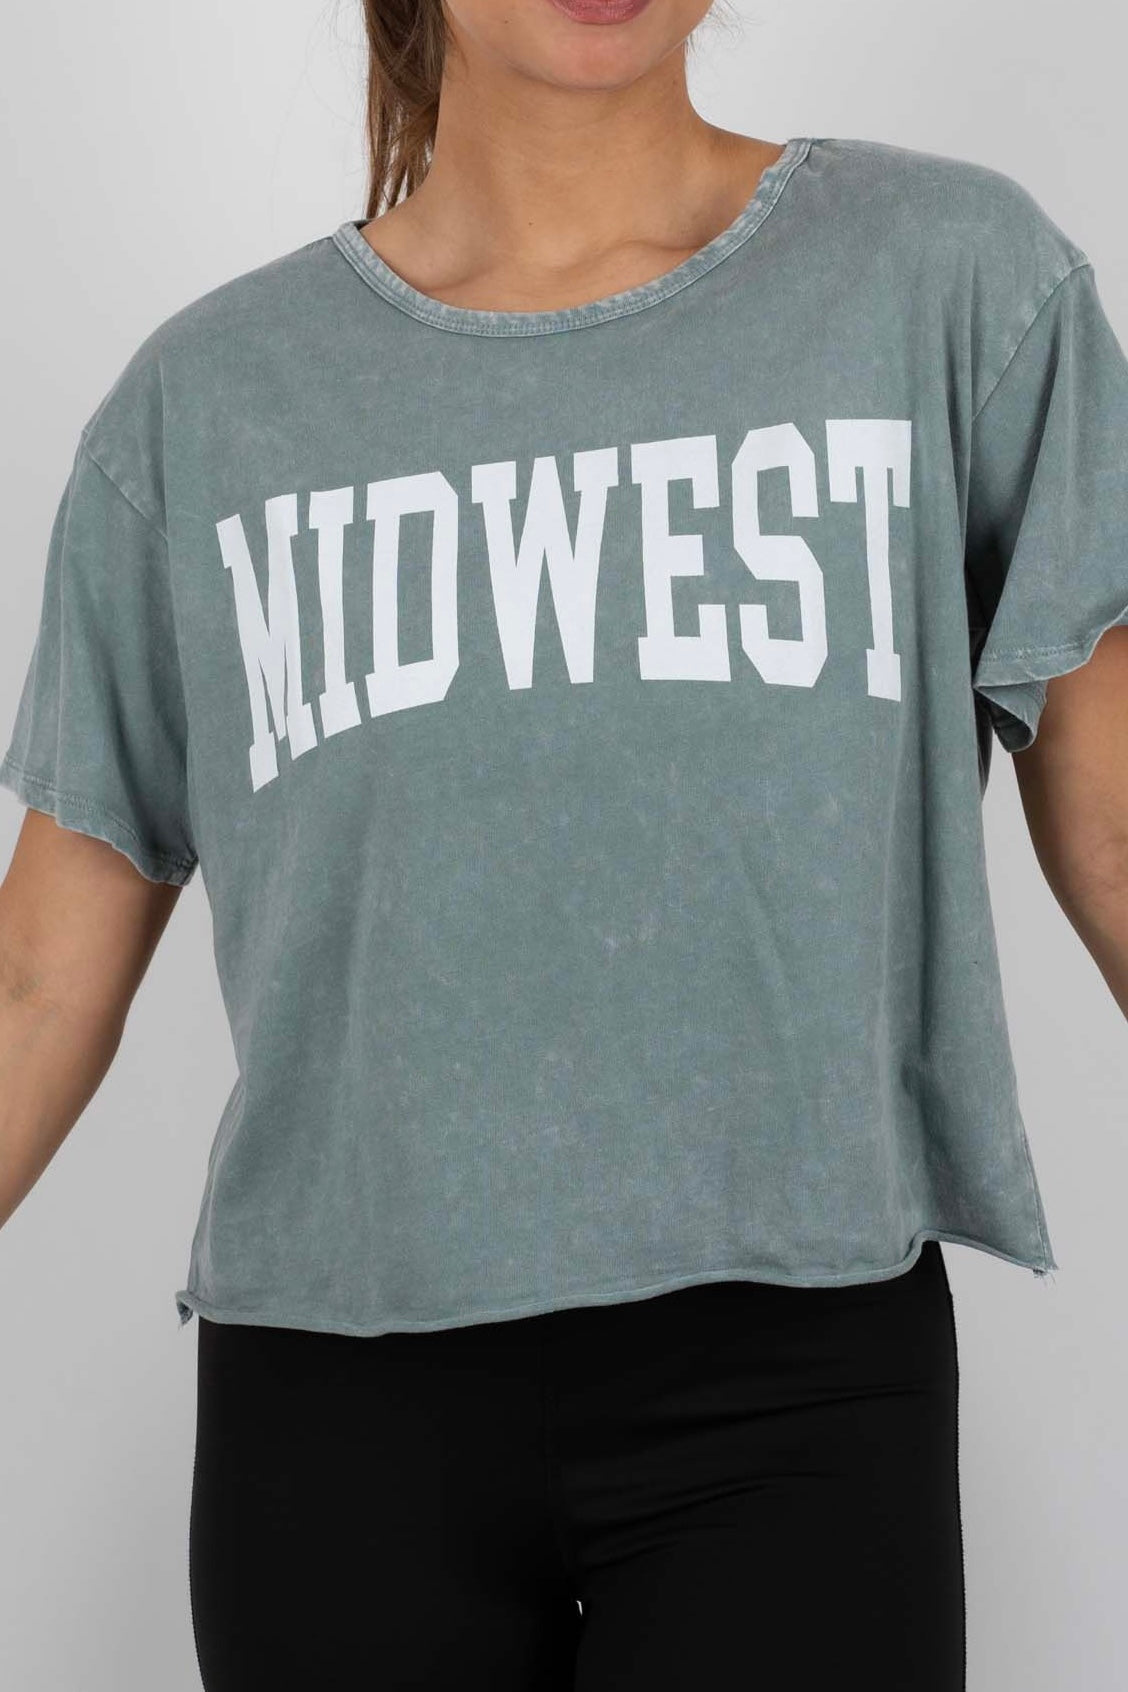 Midwest Mineral Wash Tee